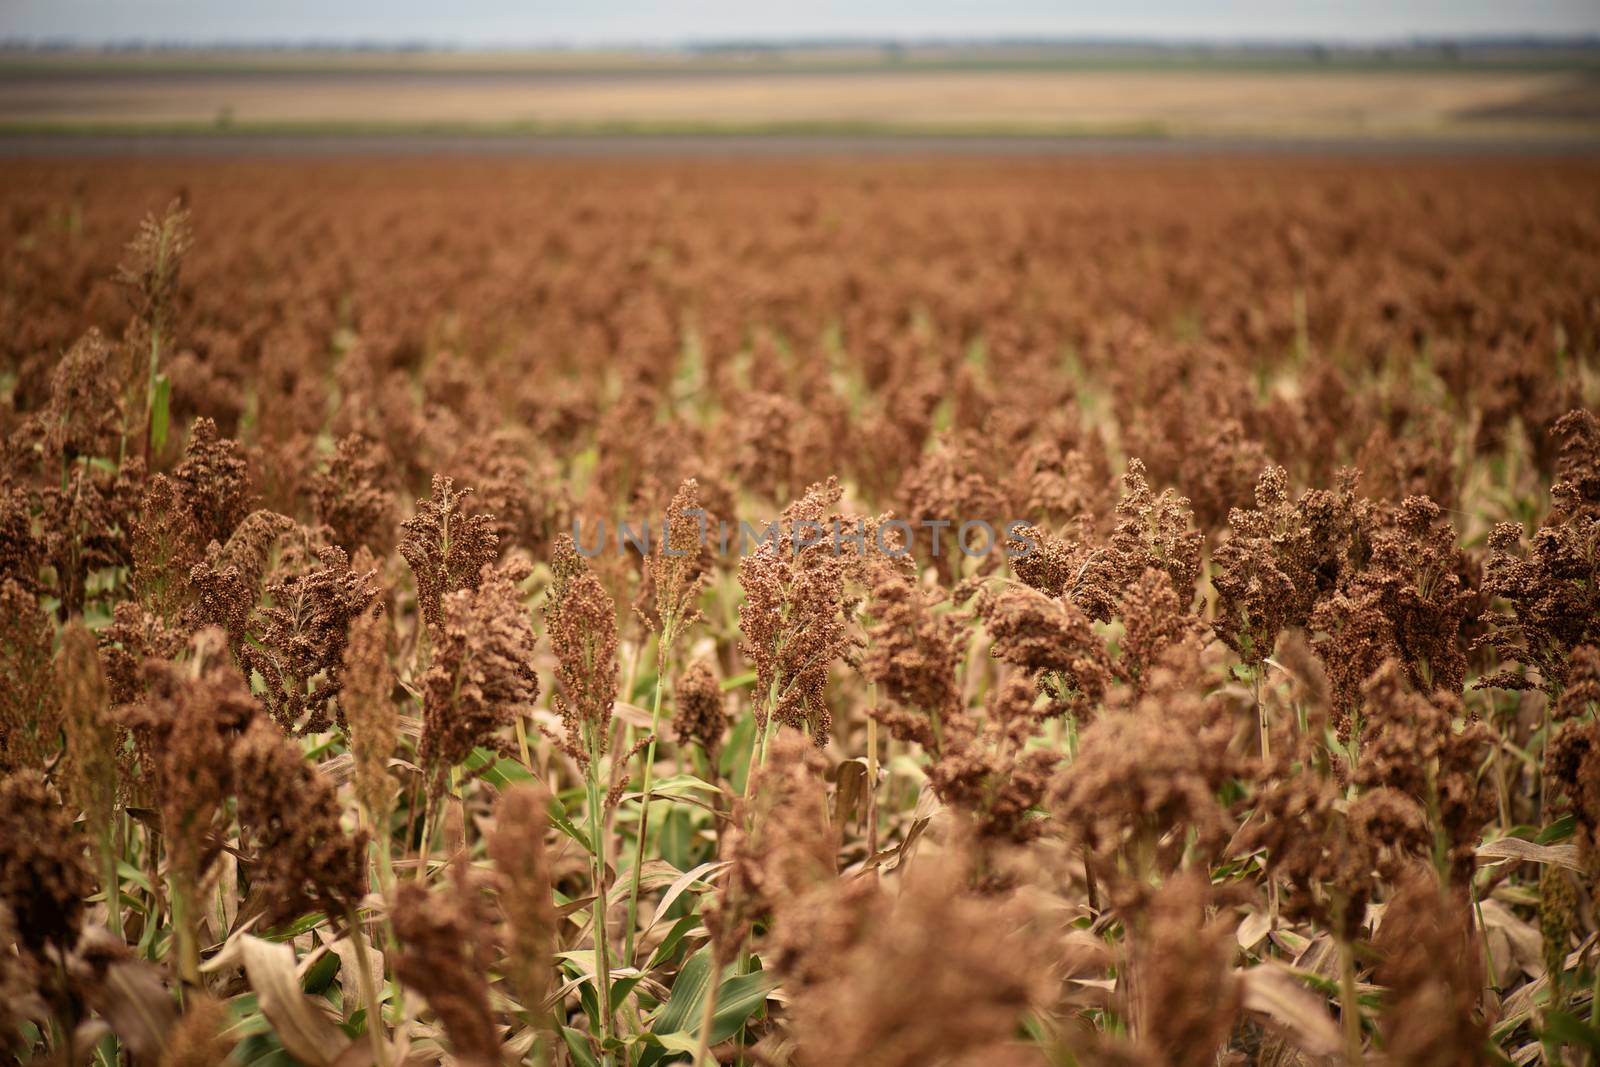 Field of Australian sorghum during the day time.